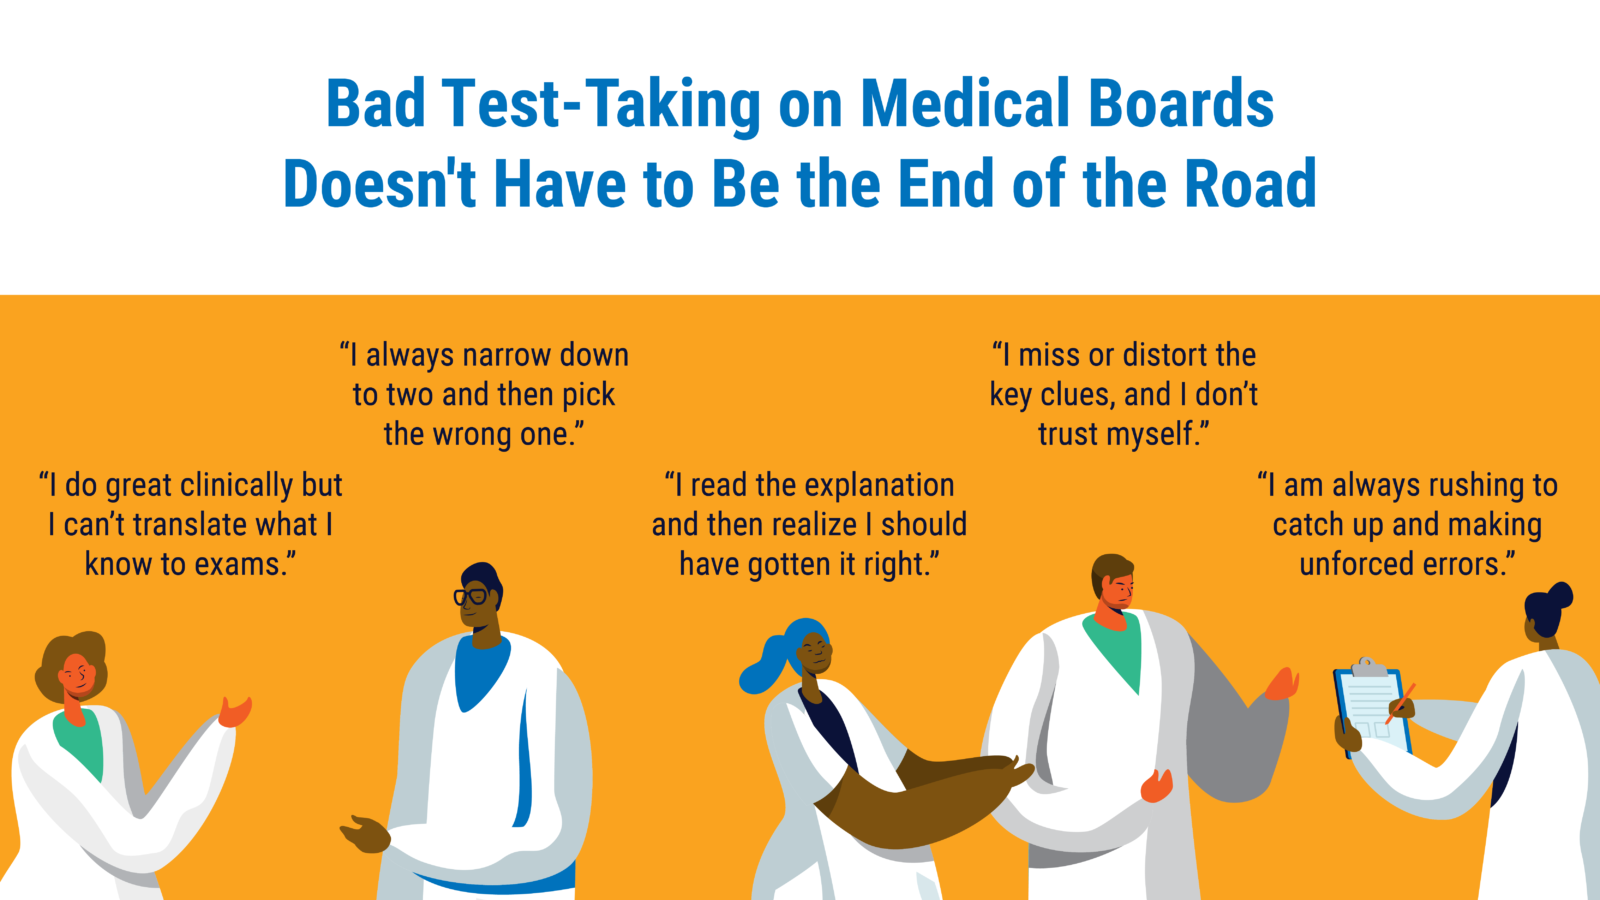 Five images of med school students and doctors share reasons for bad test-taking.